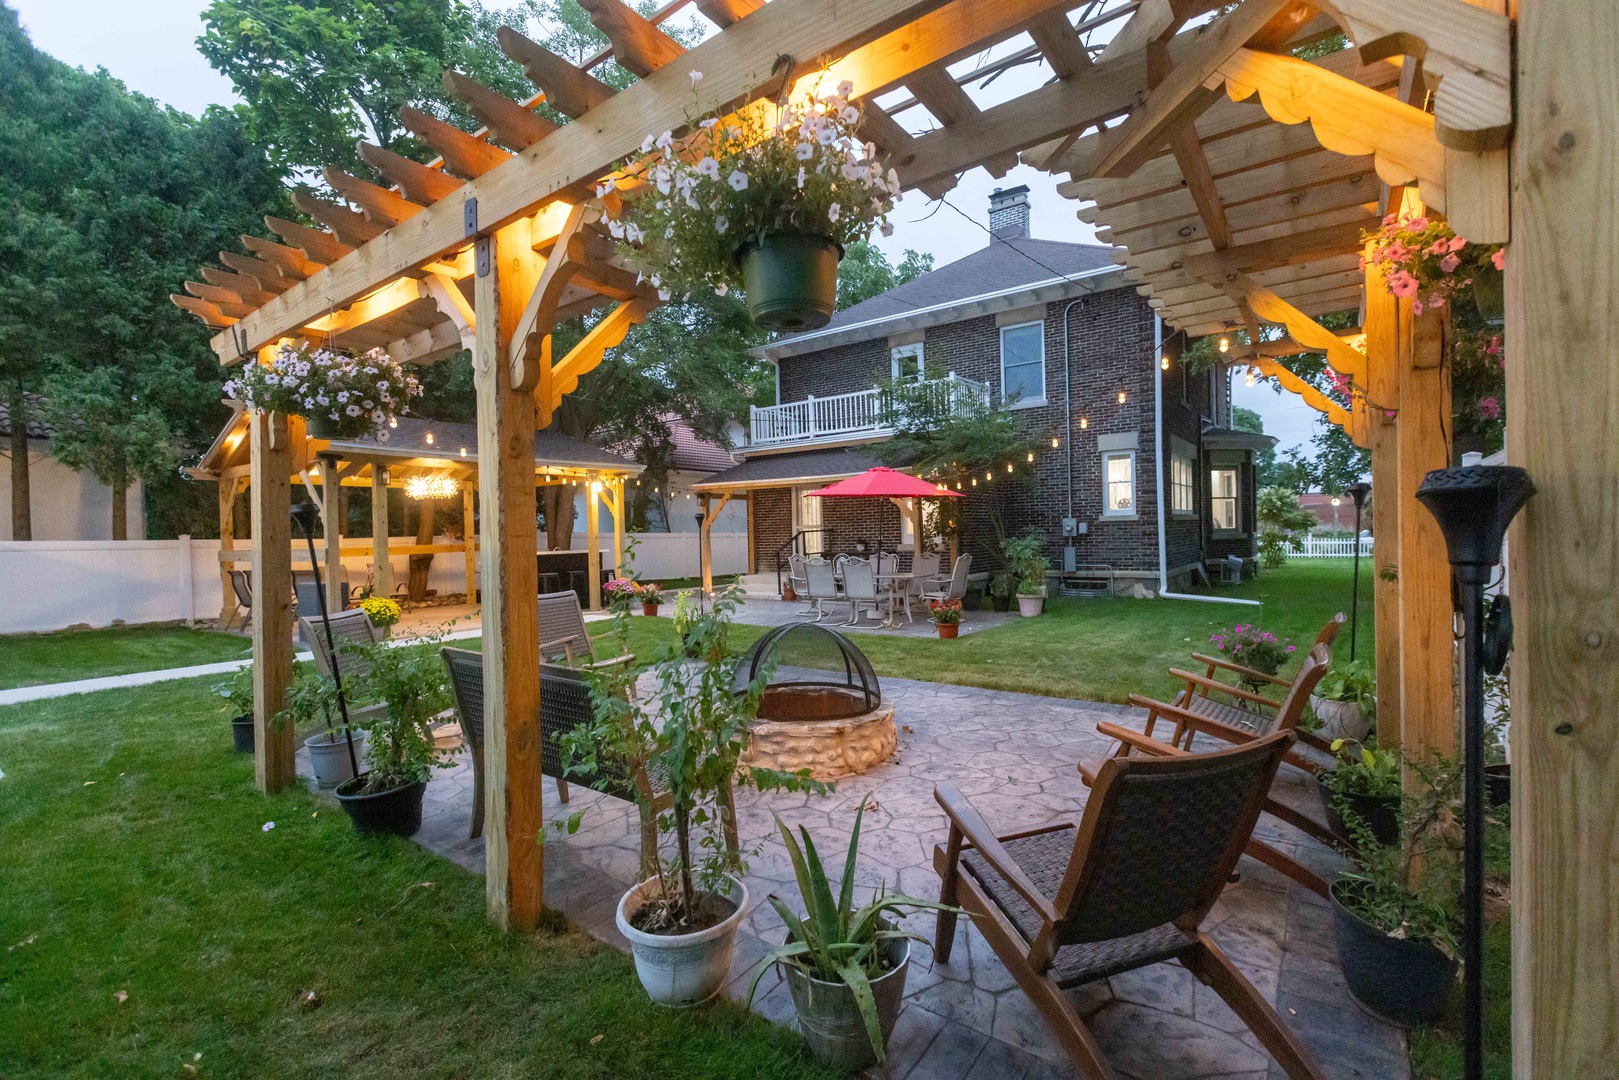 The large back yard offers tons of space for relaxation, dining, & play